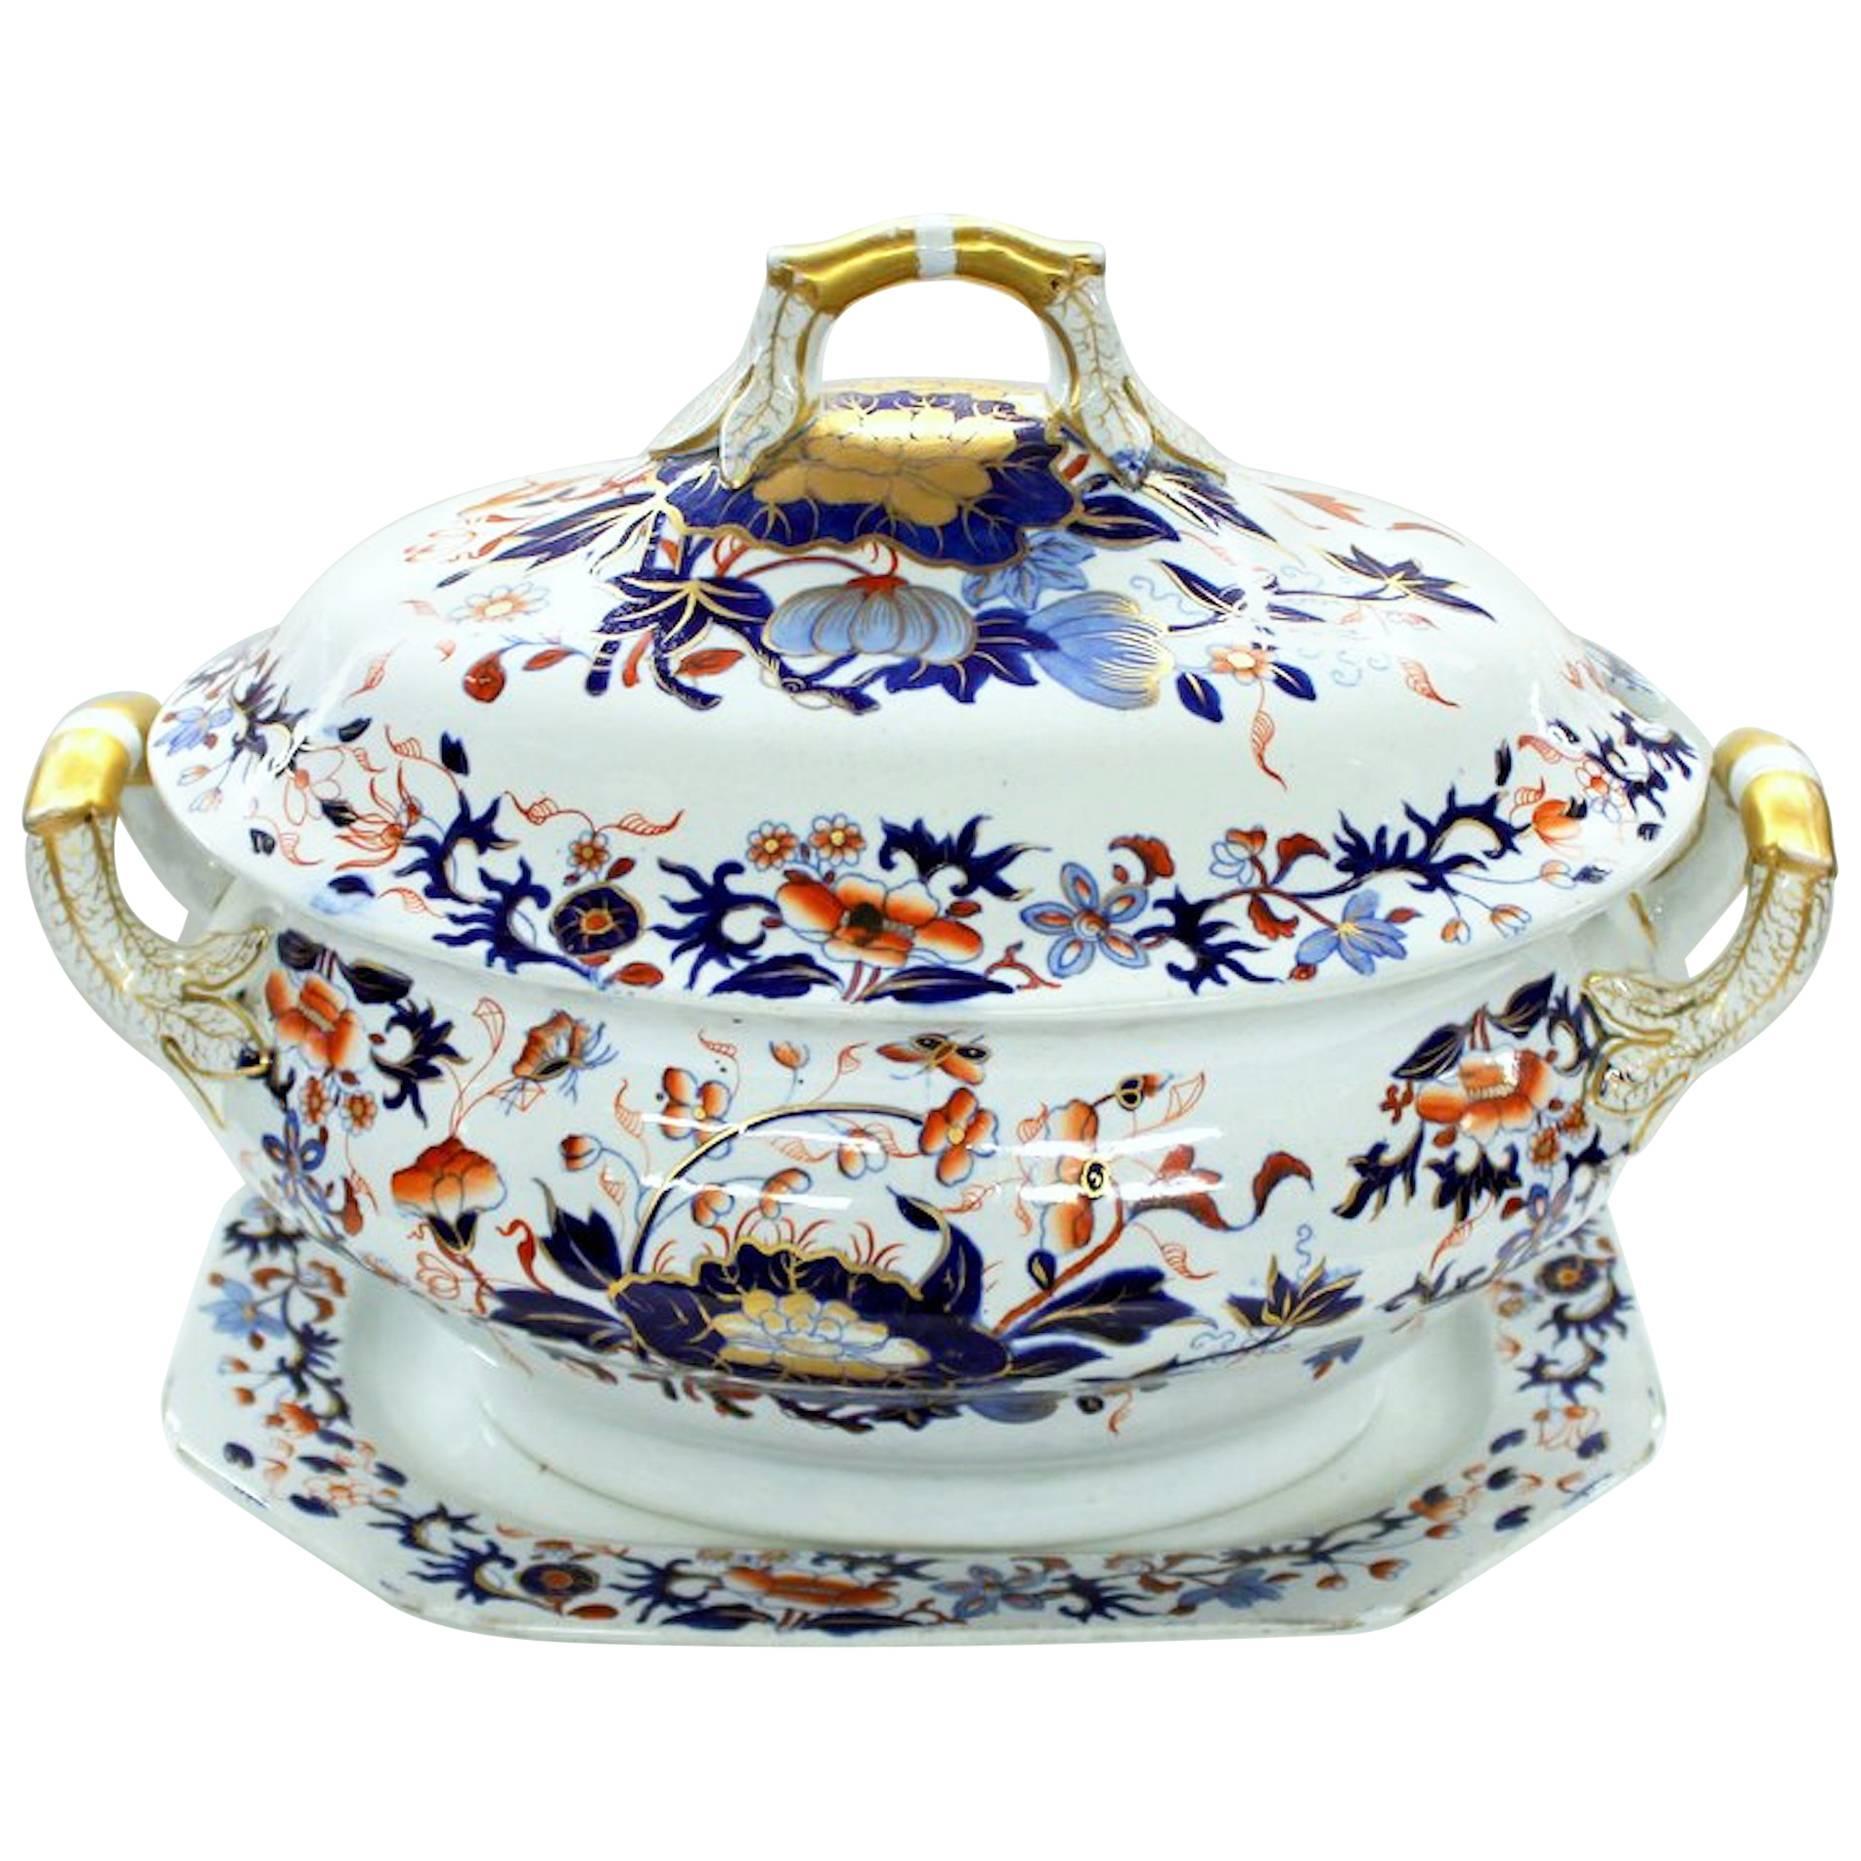 Antique English Spode's "New Stone" Large Imari decor Soup Tureen, Lid and Stand